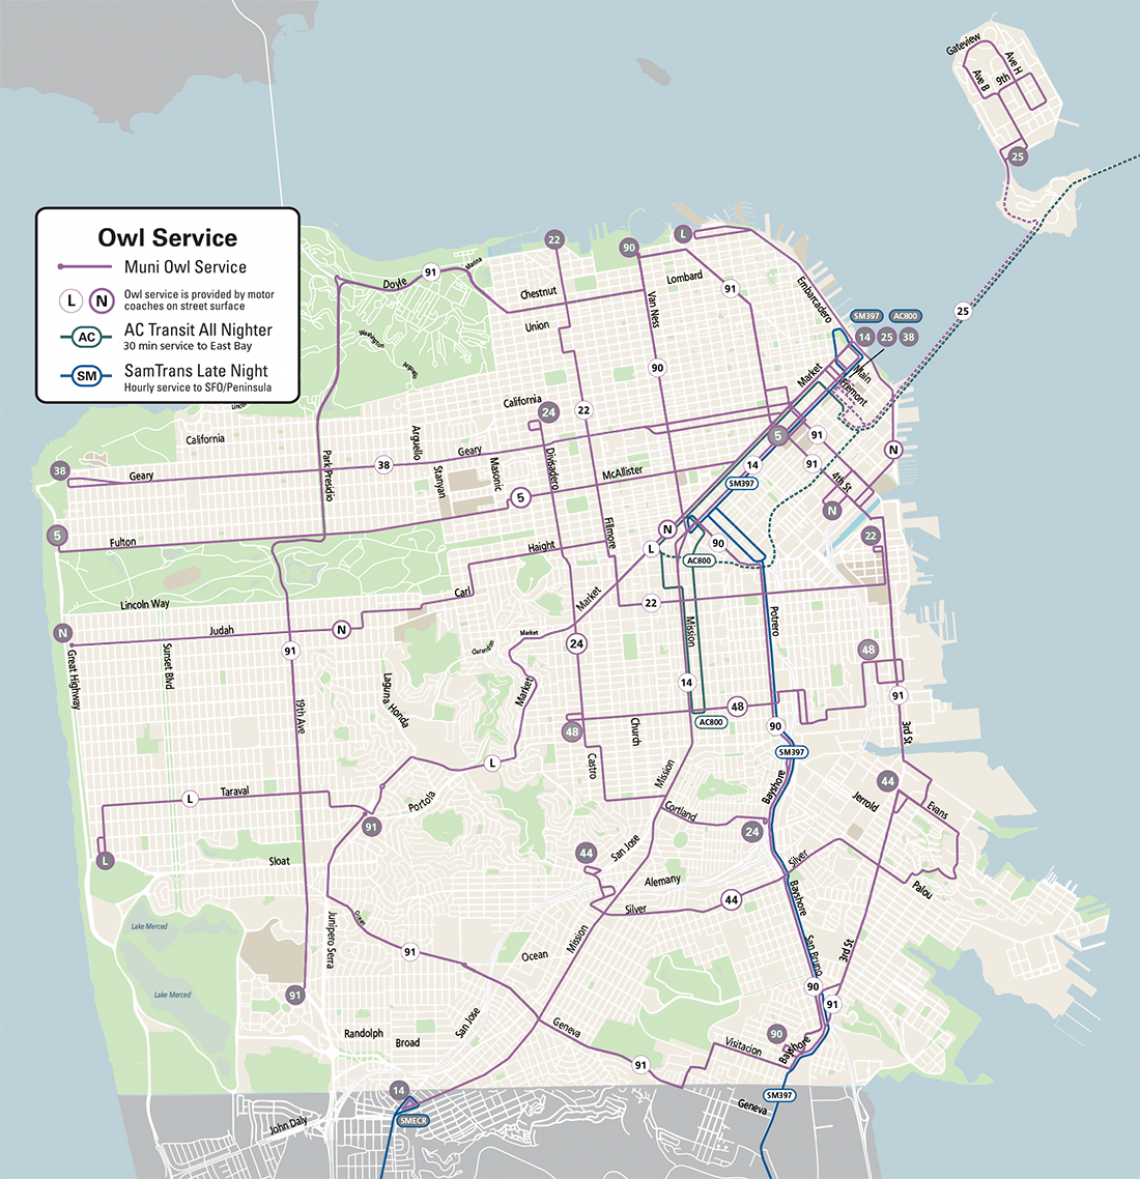 Map of the Muni Owl All-Nighter Service Routes